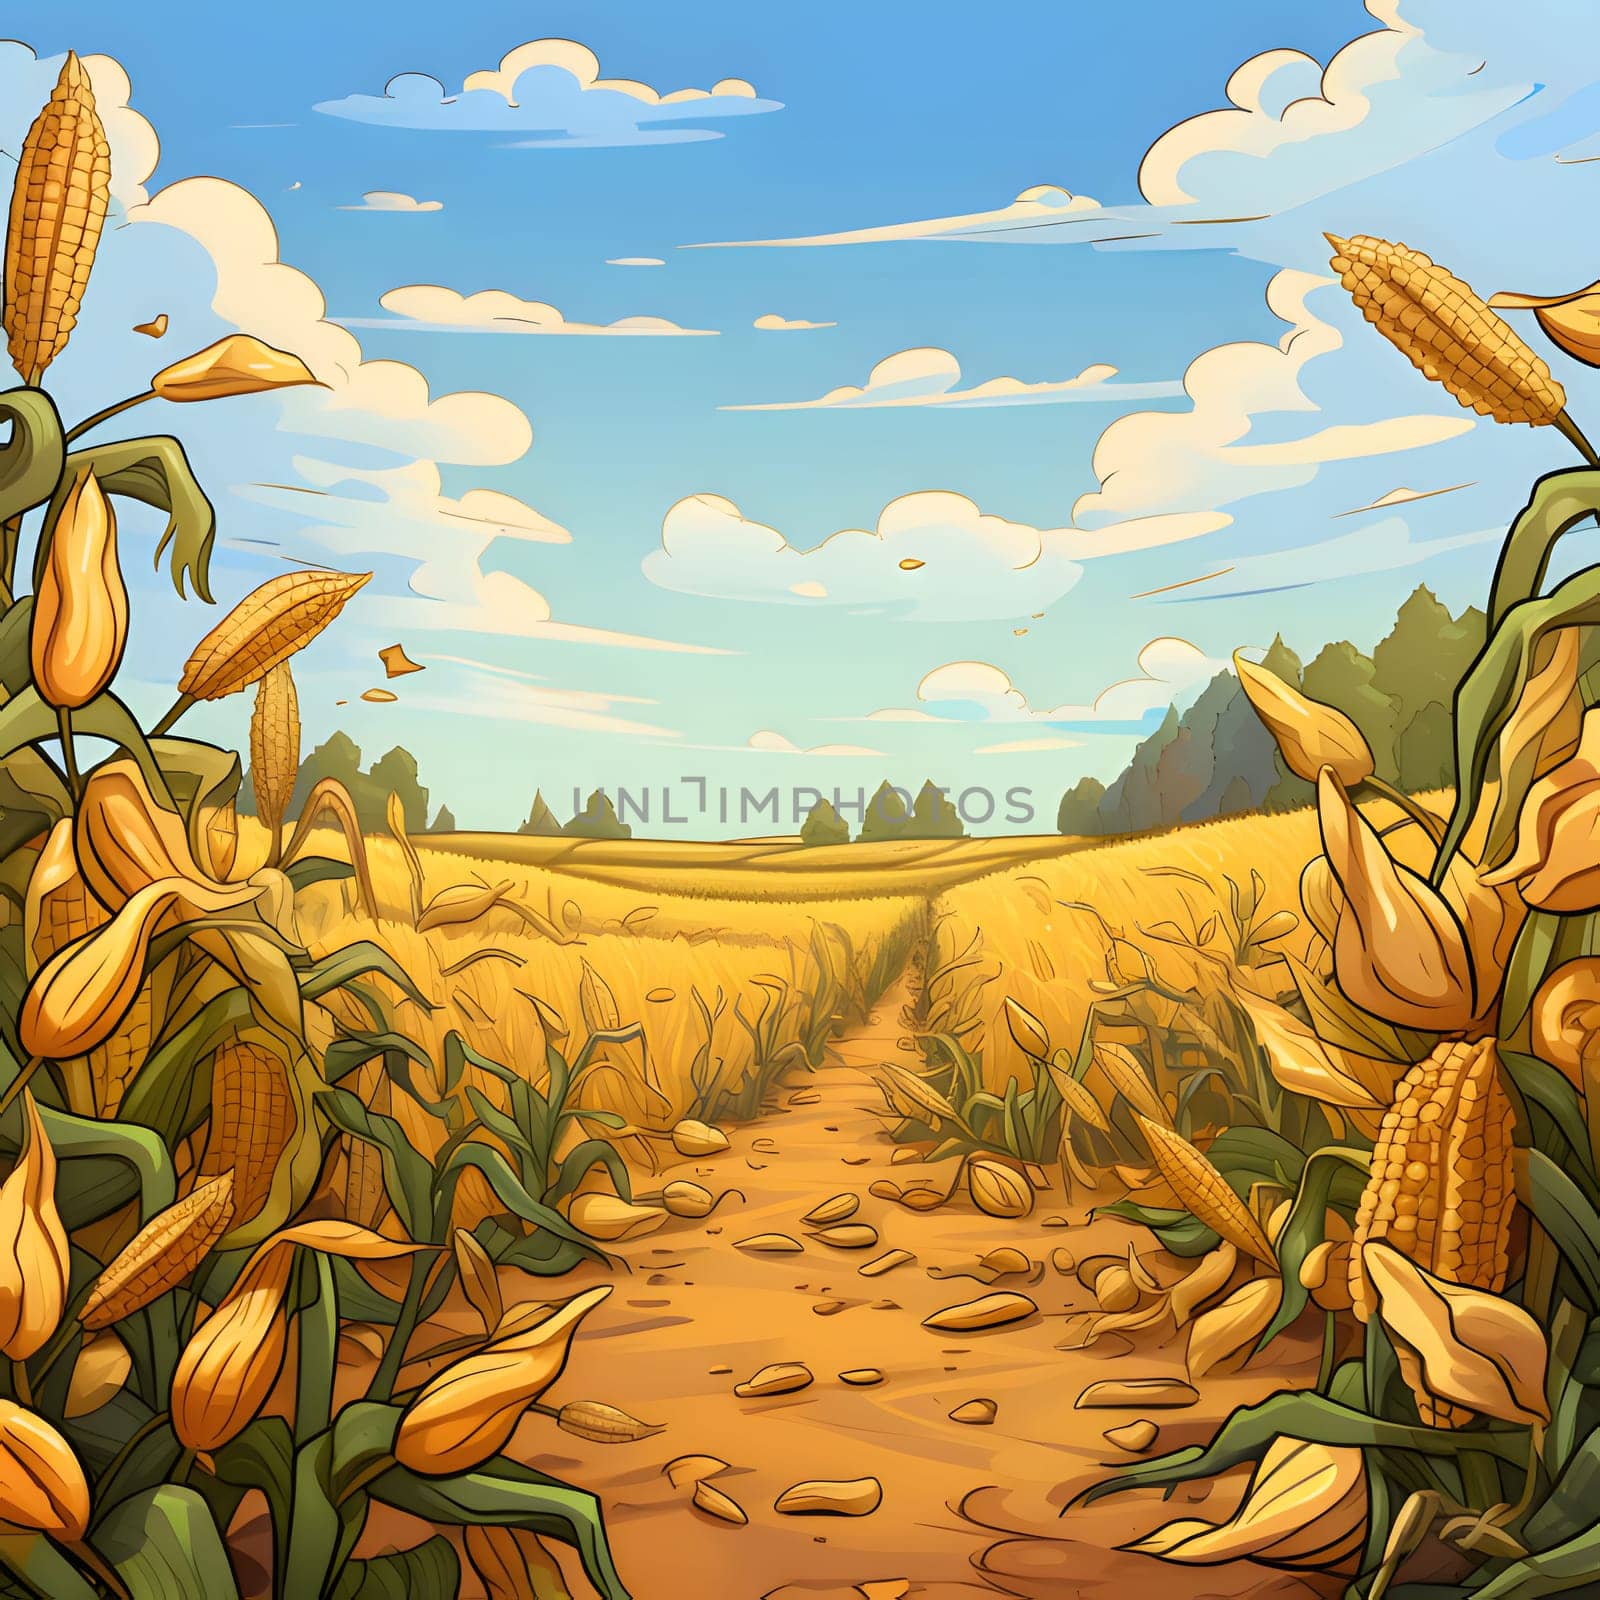 Illustration of a field of corn in autumn. Corn as a dish of thanksgiving for the harvest. An atmosphere of joy and celebration.